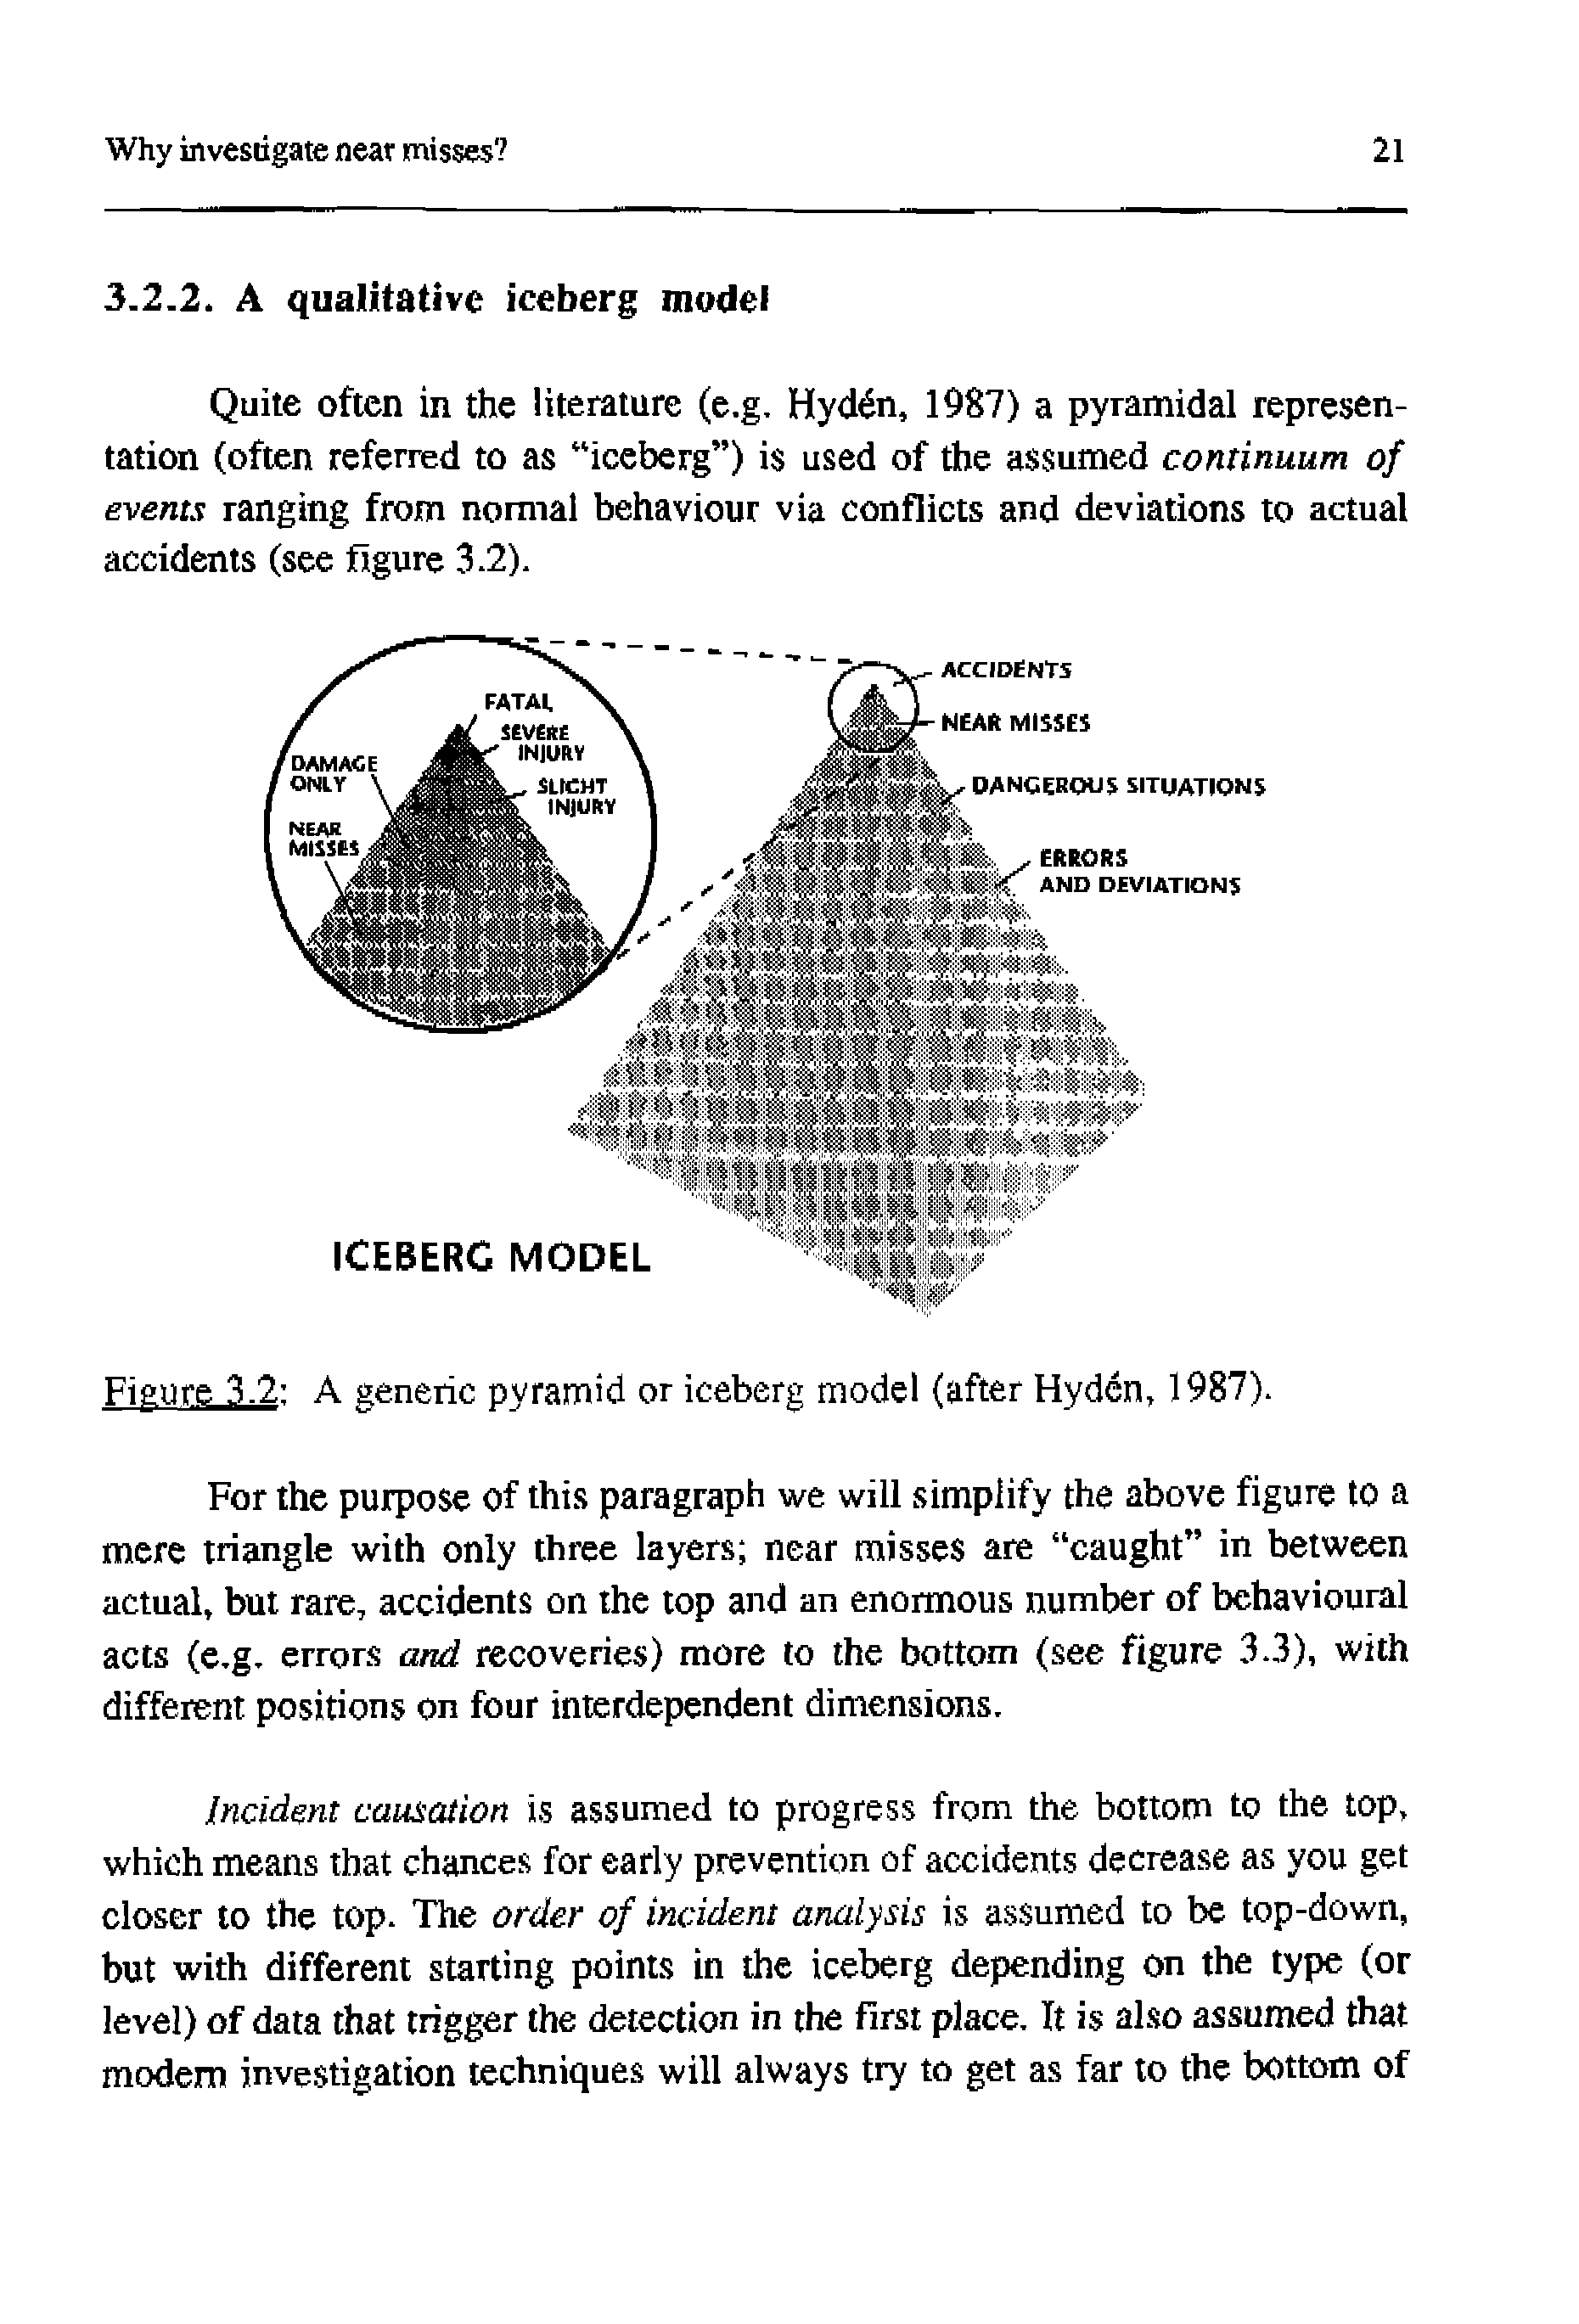 Figure 3.2 A generic pyramid or iceberg model (after Hyden, 1987).